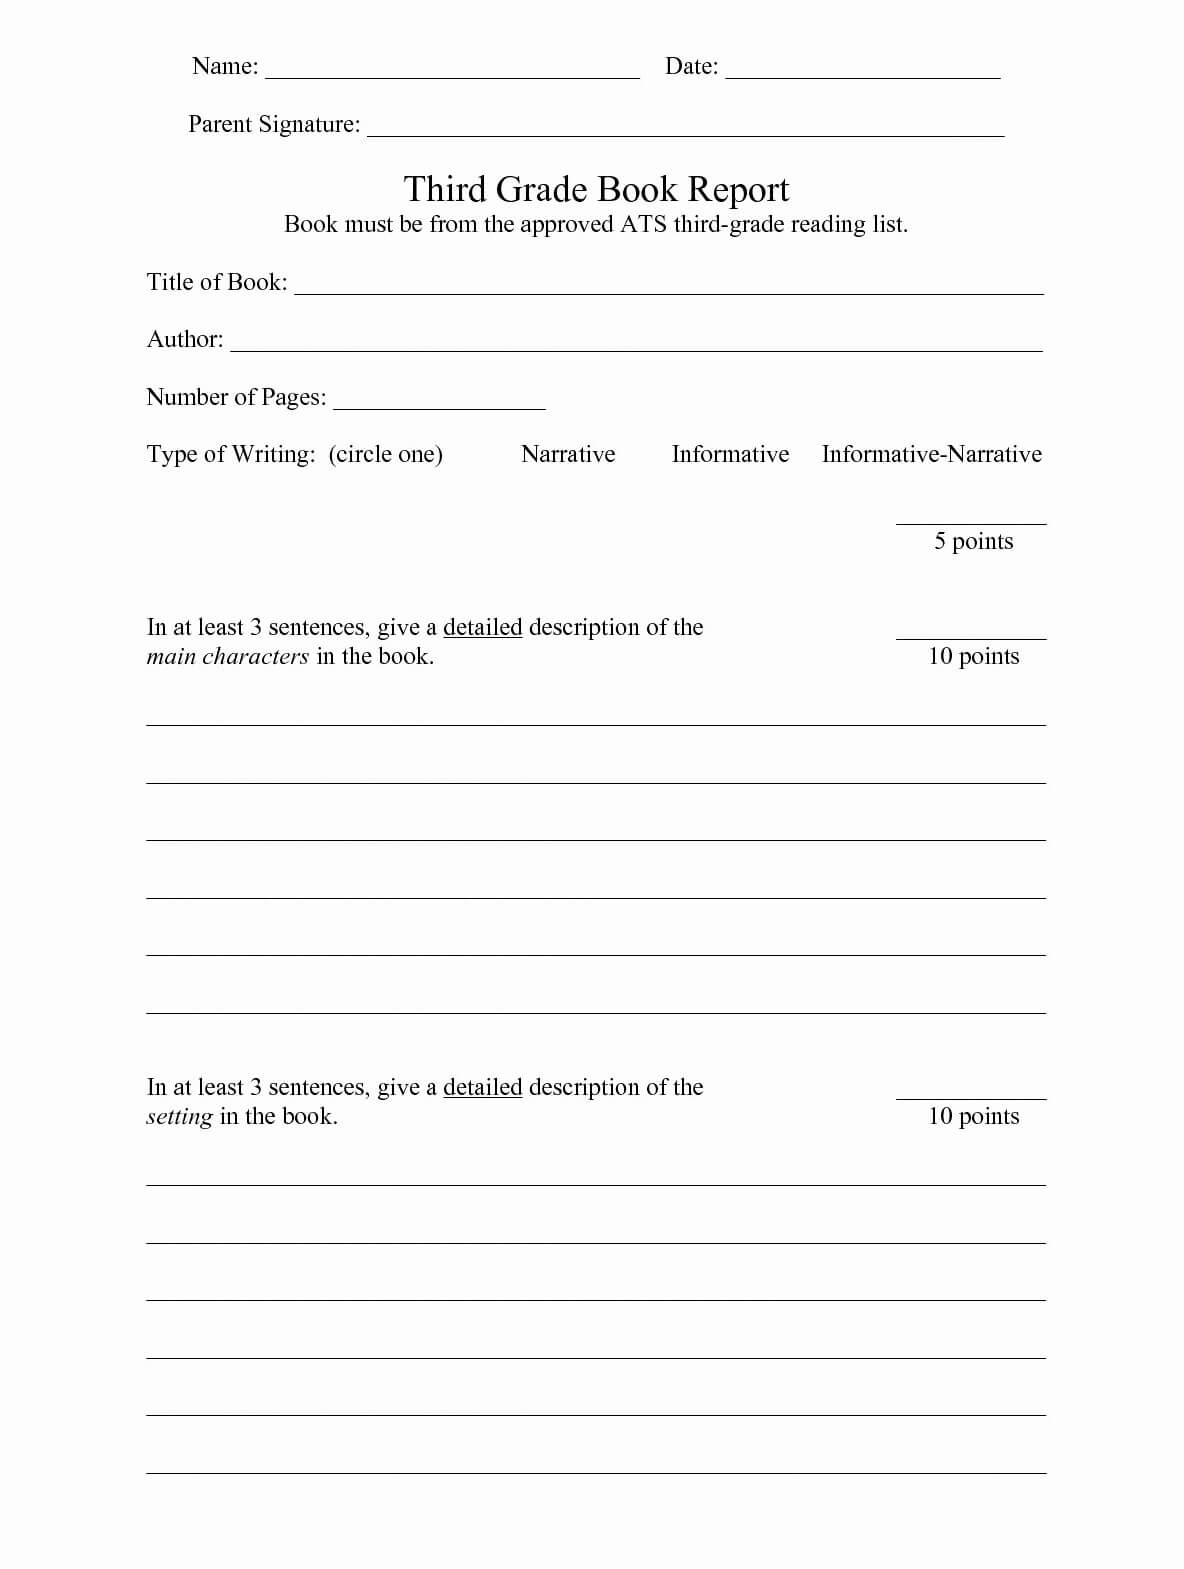 3Rd Grade Book Report Template 1St To 5Th One Platform For Pertaining To 1St Grade Book Report Template